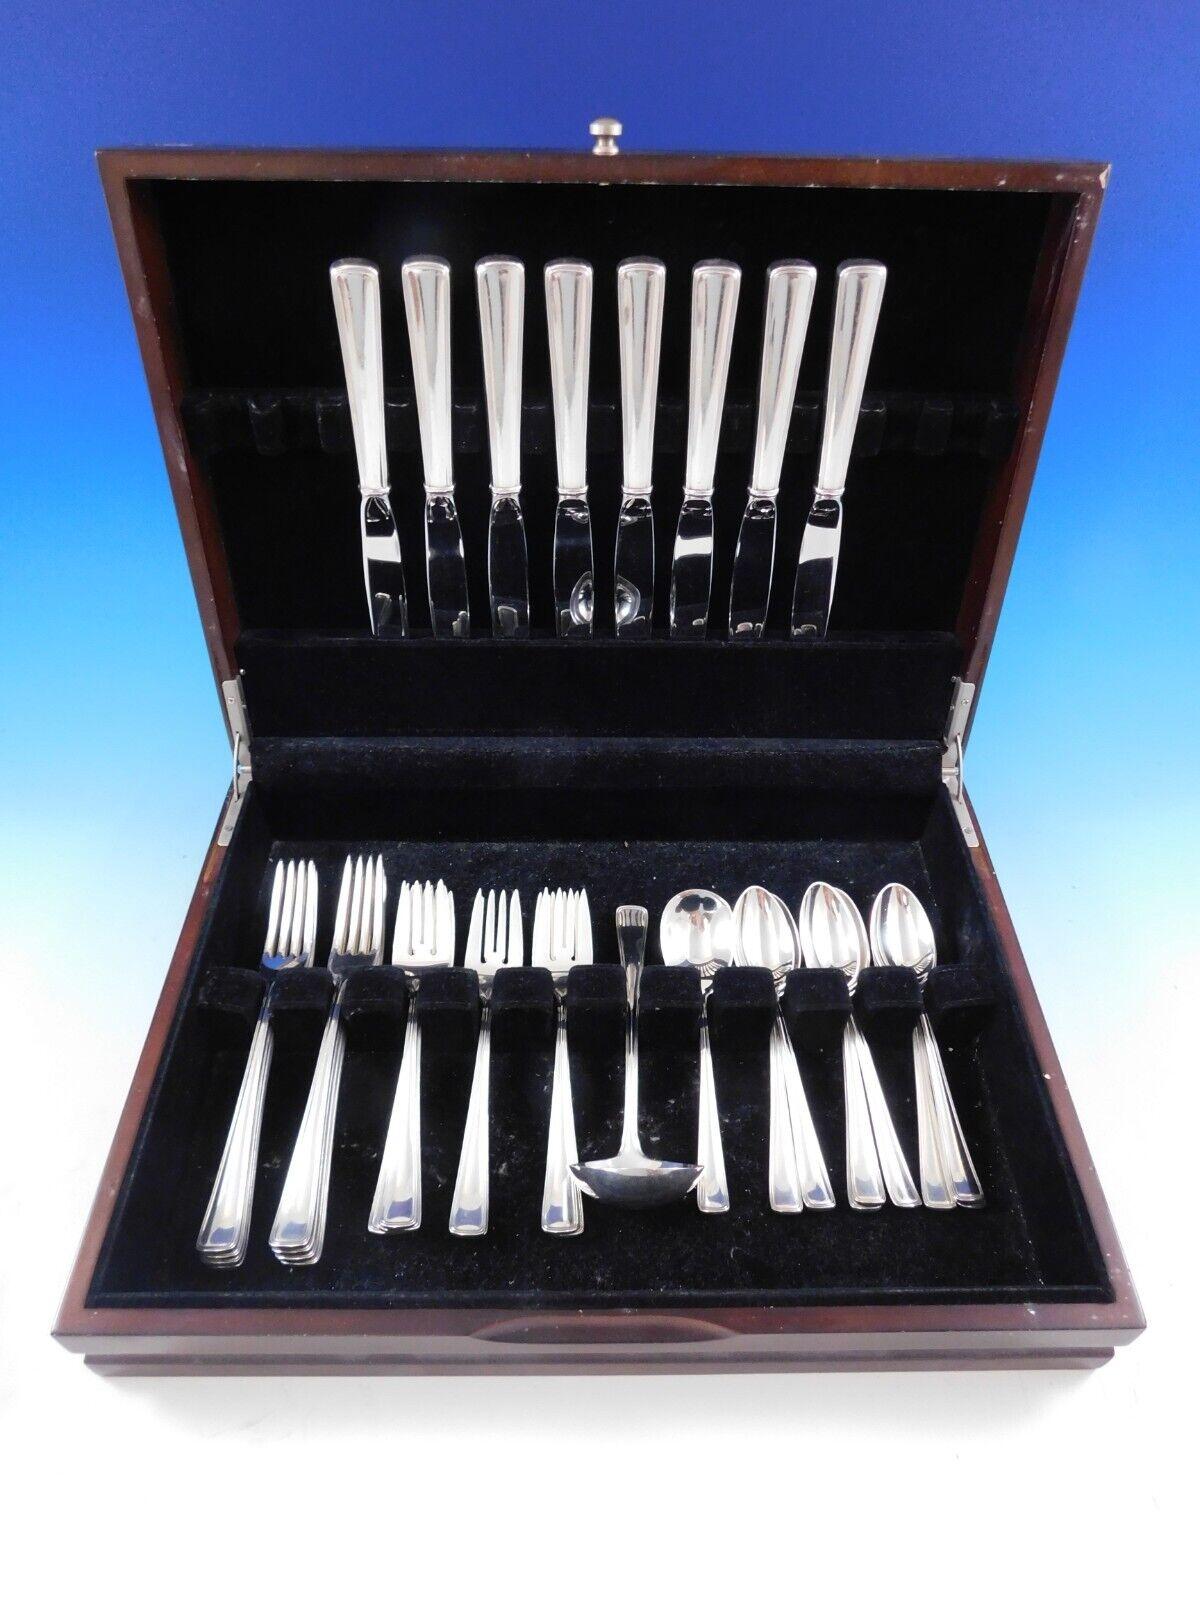 Compton thread by Blackinton/Towle sterling silver flatware set - 34 pieces. This set includes:

8 knives, 9